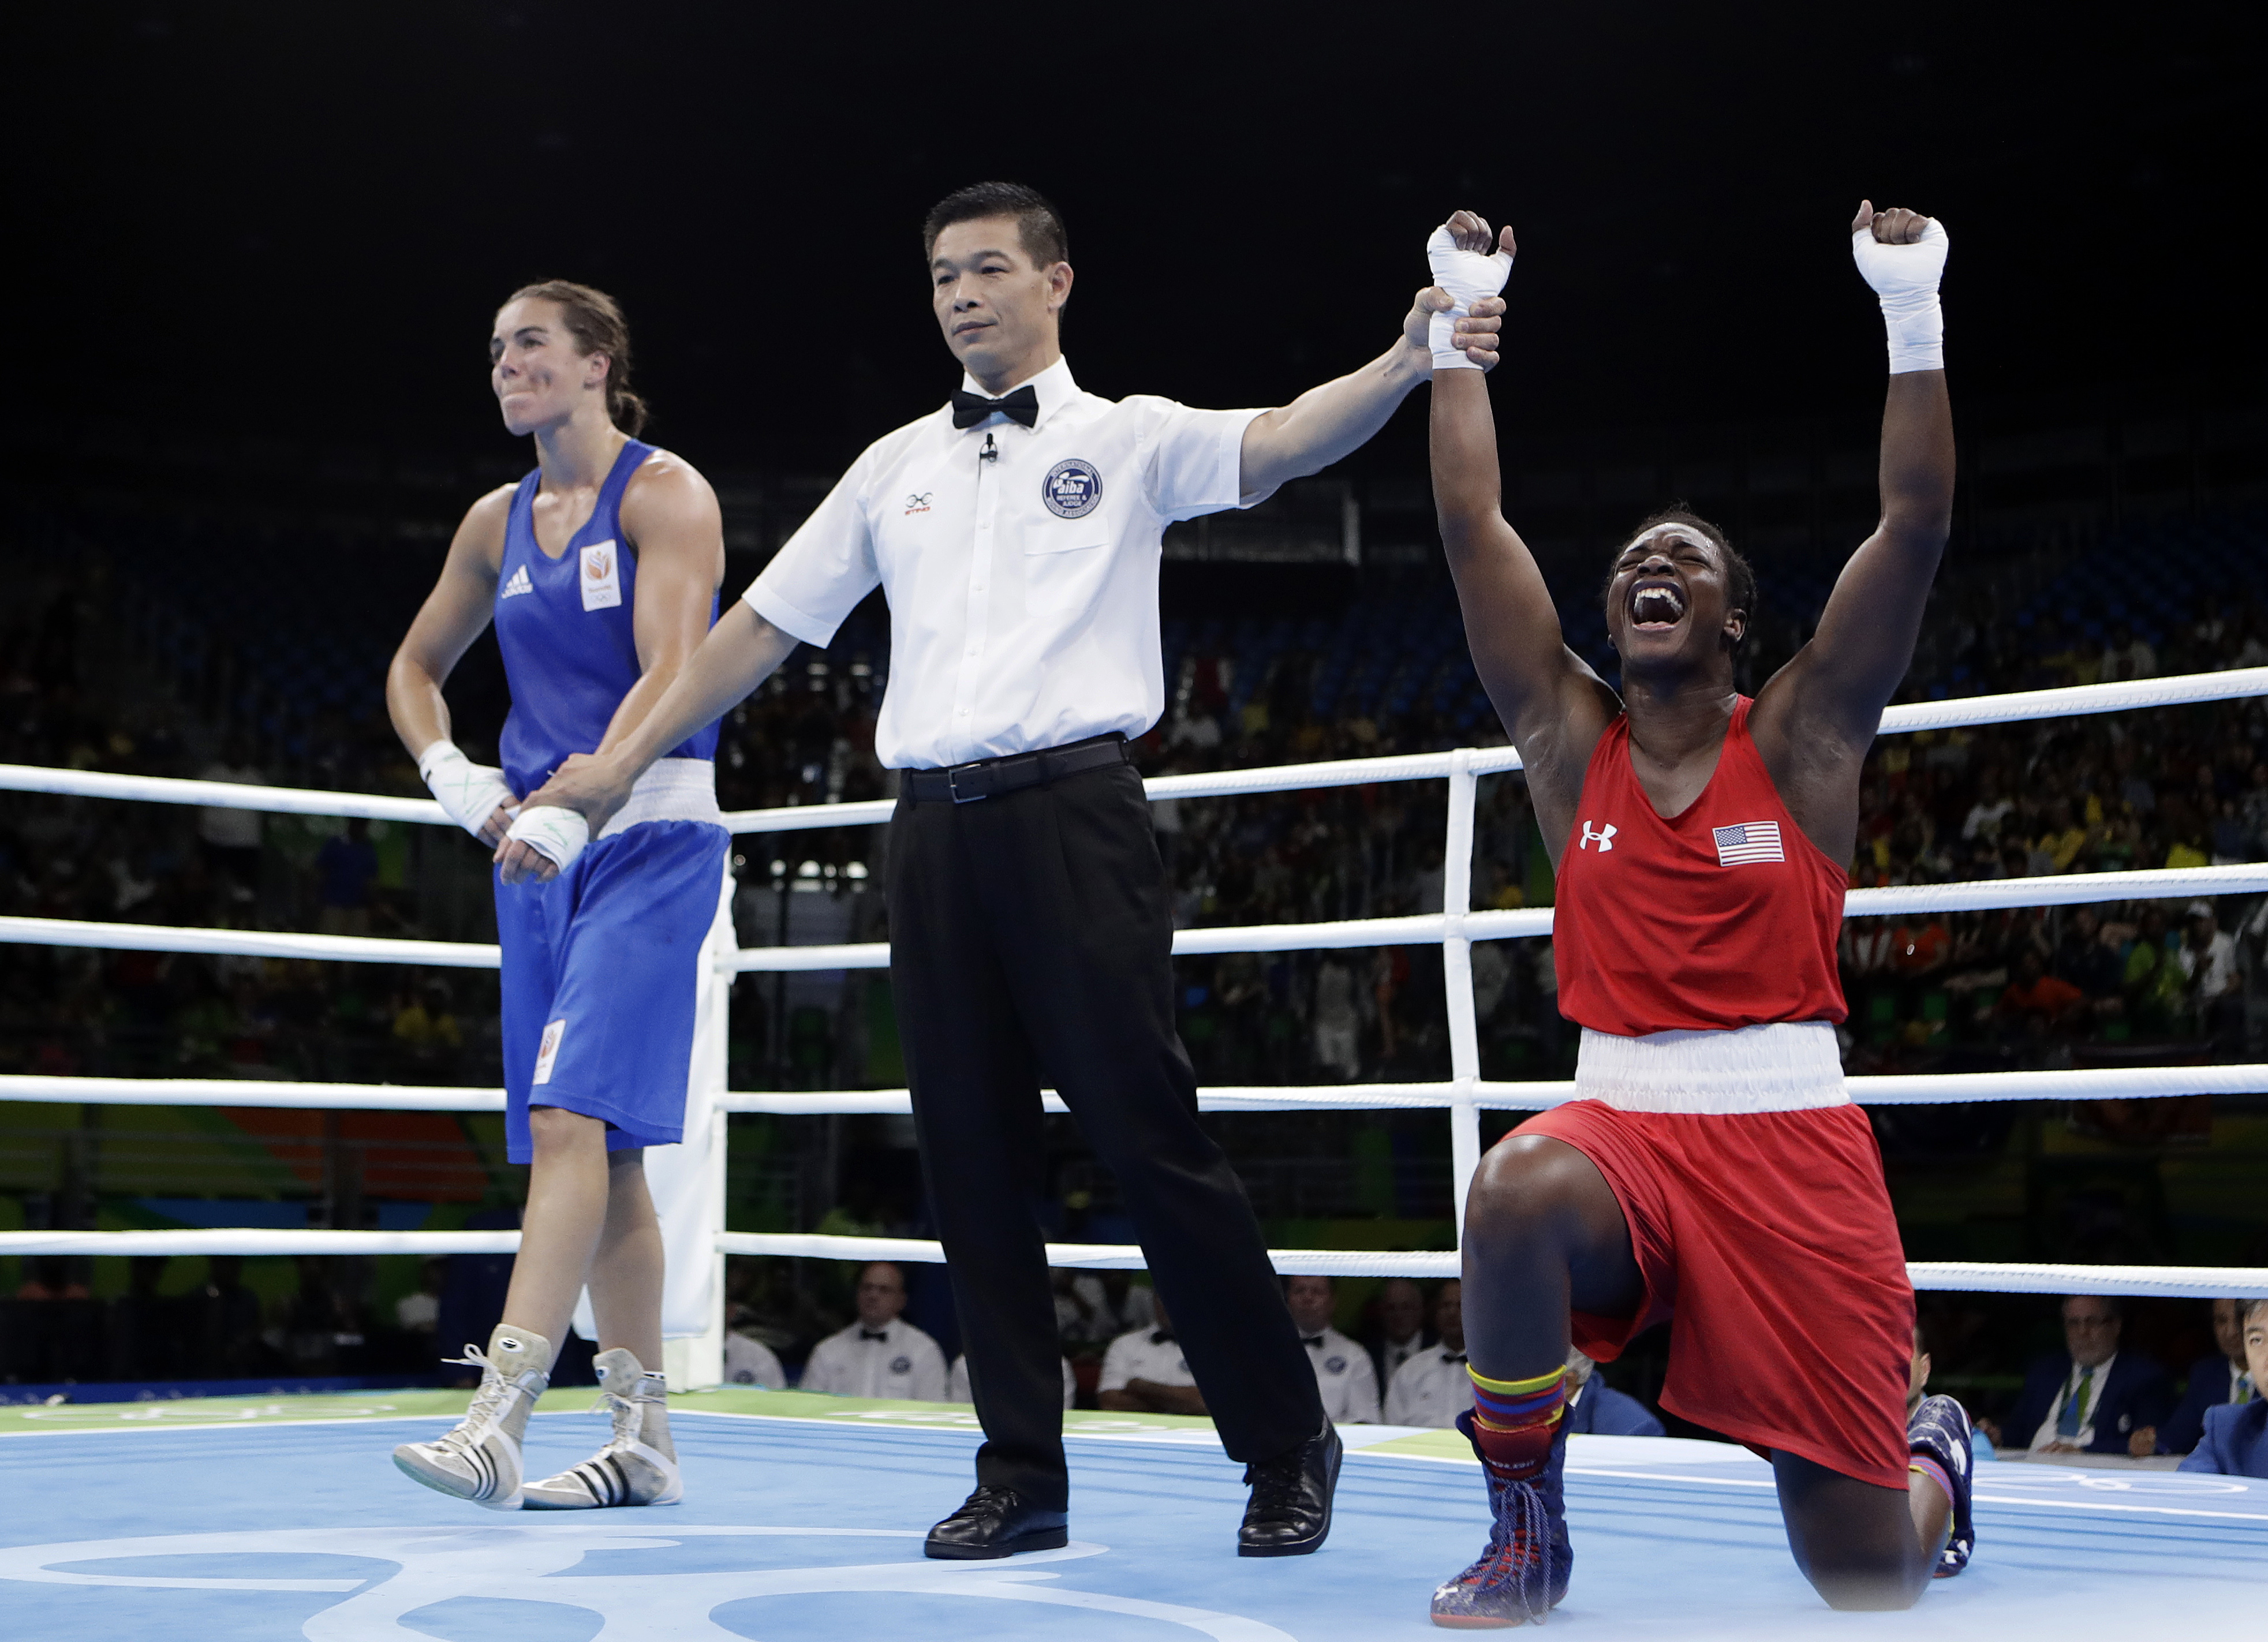 Claressa Shields 1st American with 2 Olympic golds Washington Times